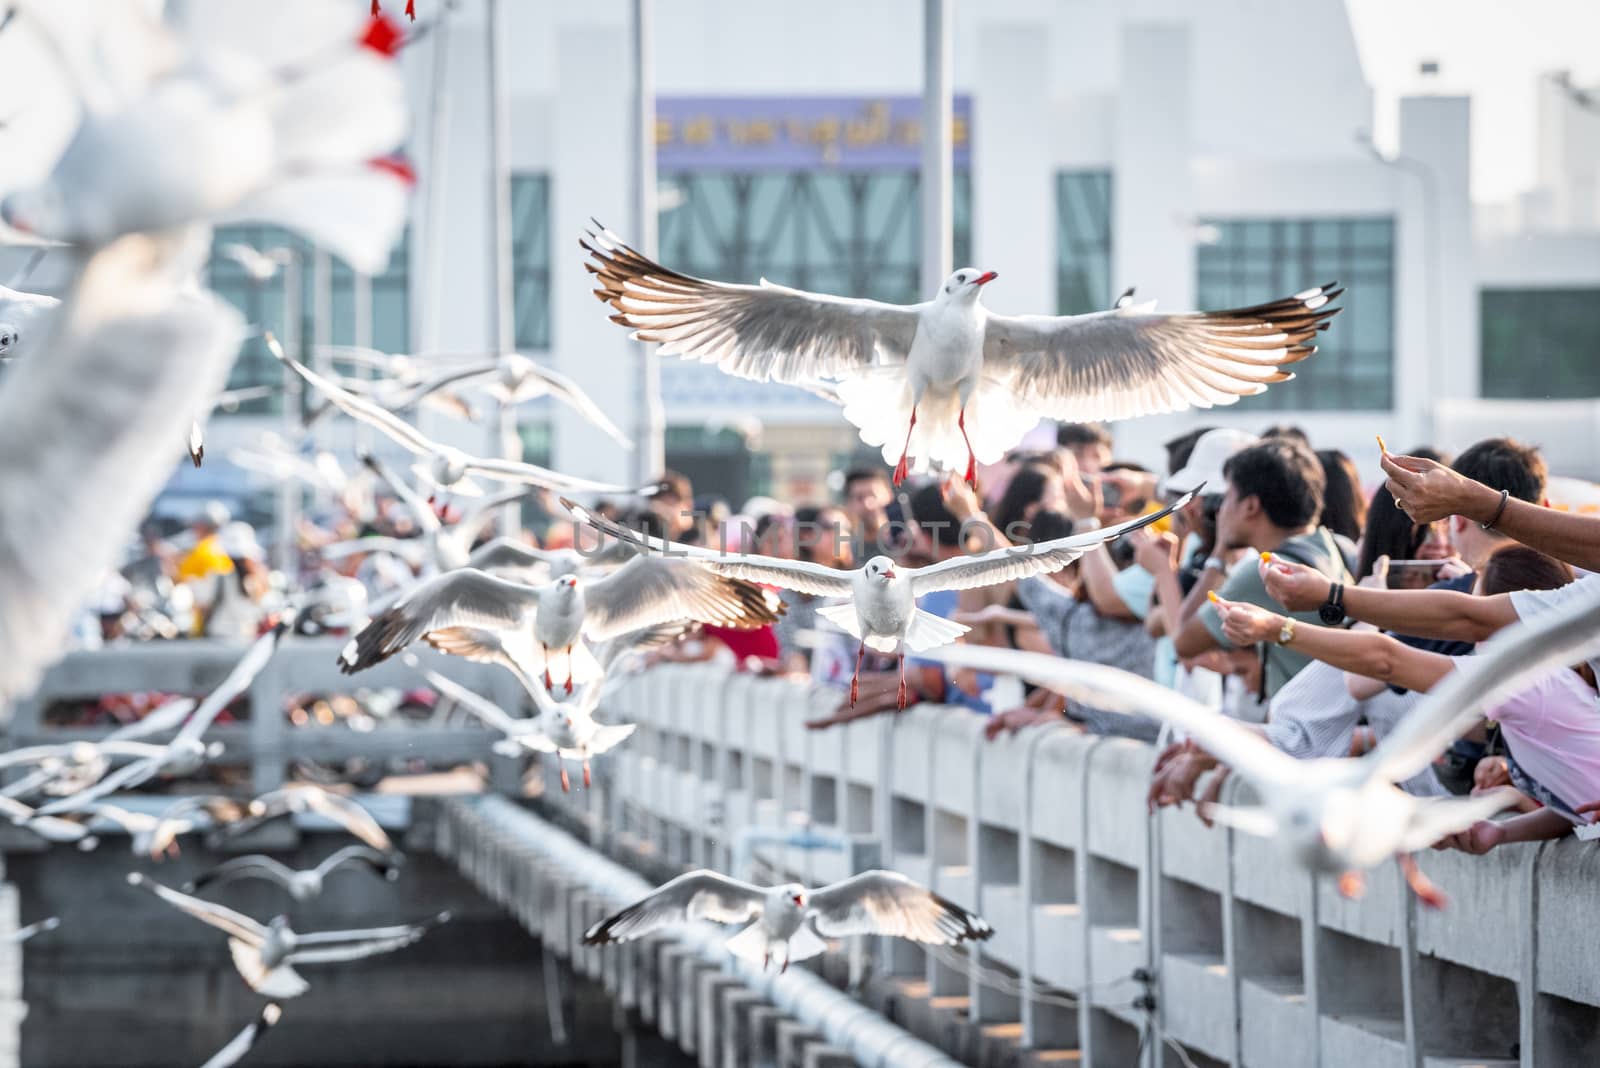 Samut Prakarn, Thailand - December 29, 2019 : Bang Pu provides habitat for large flocks of migratory seagulls annually in the early winter visitors can enjoy with feeding thousands of seagulls